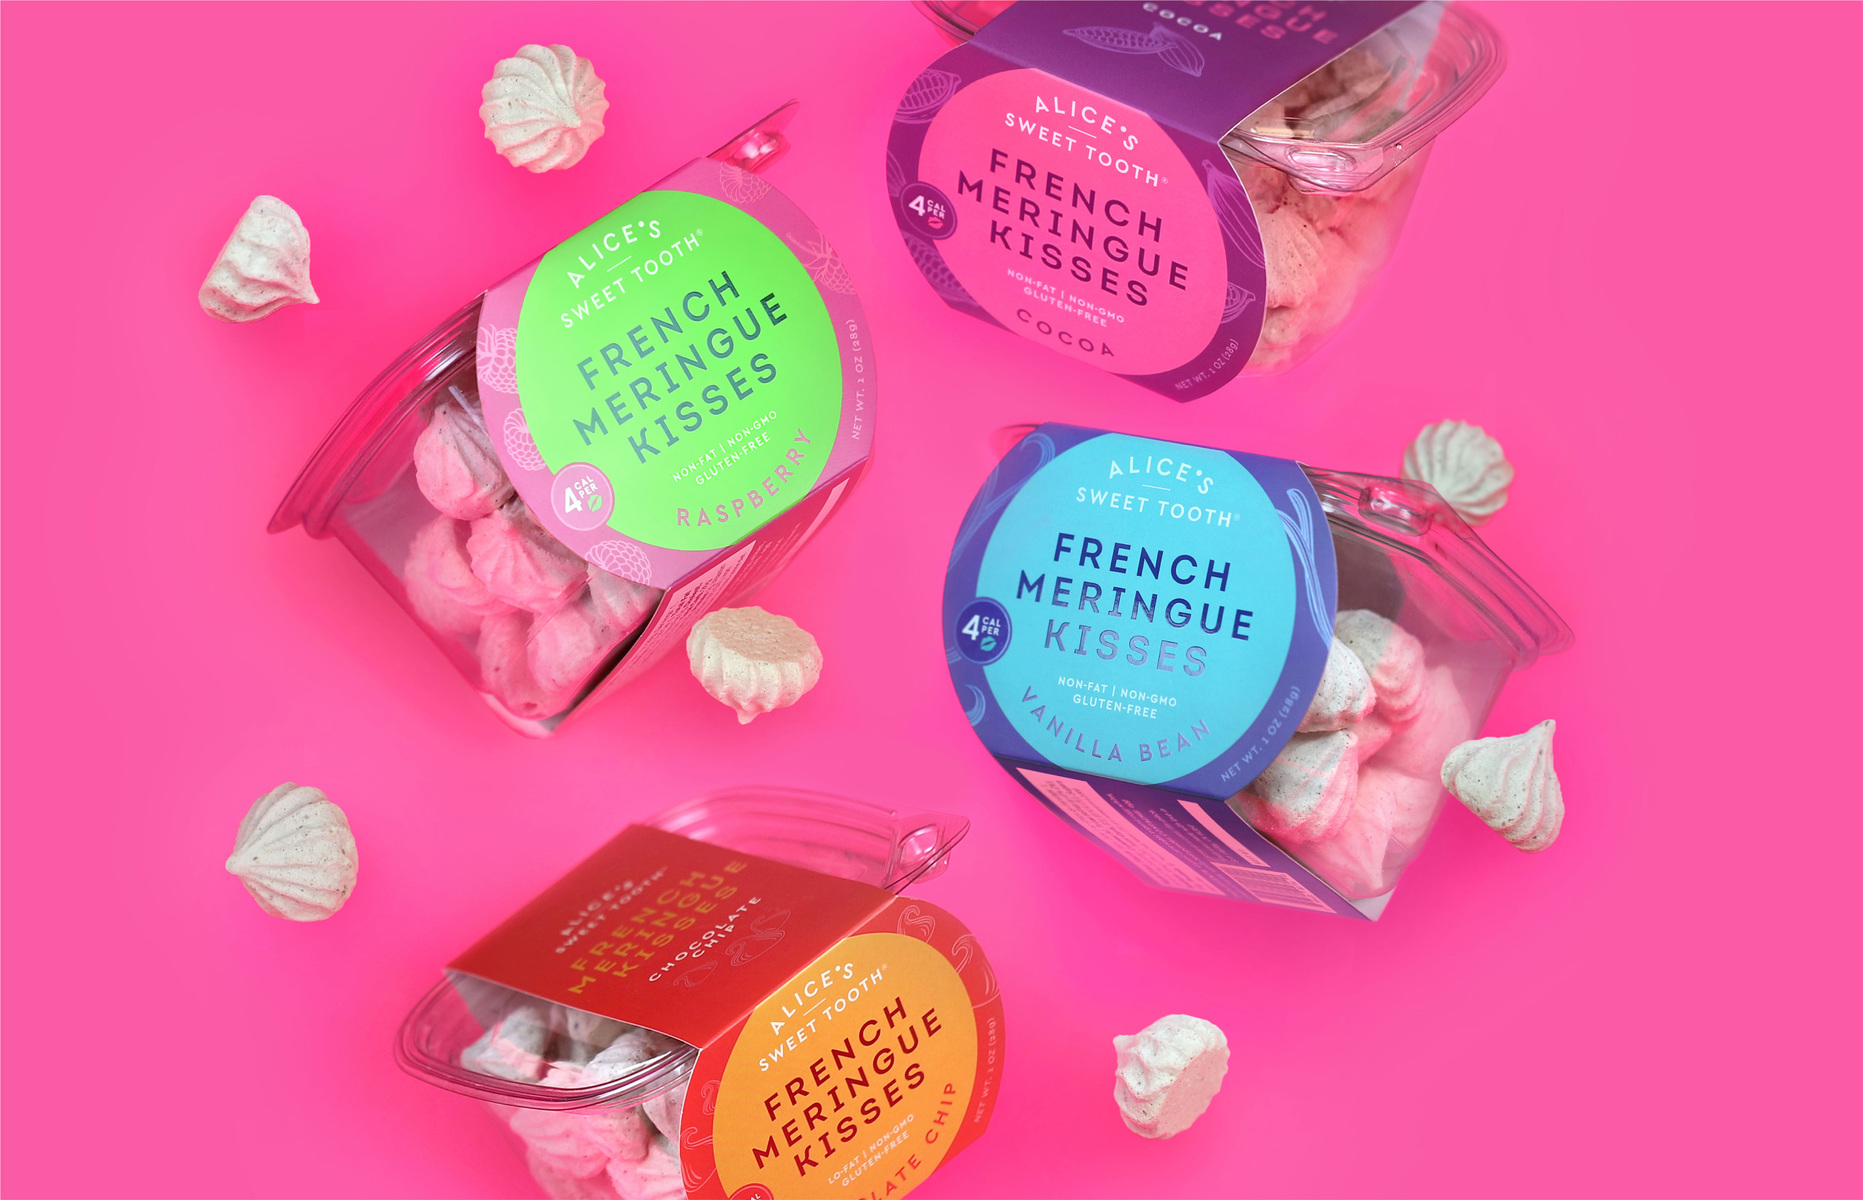 Riser Creates Brand and Packaging Design for Alice’s Sweet Tooth